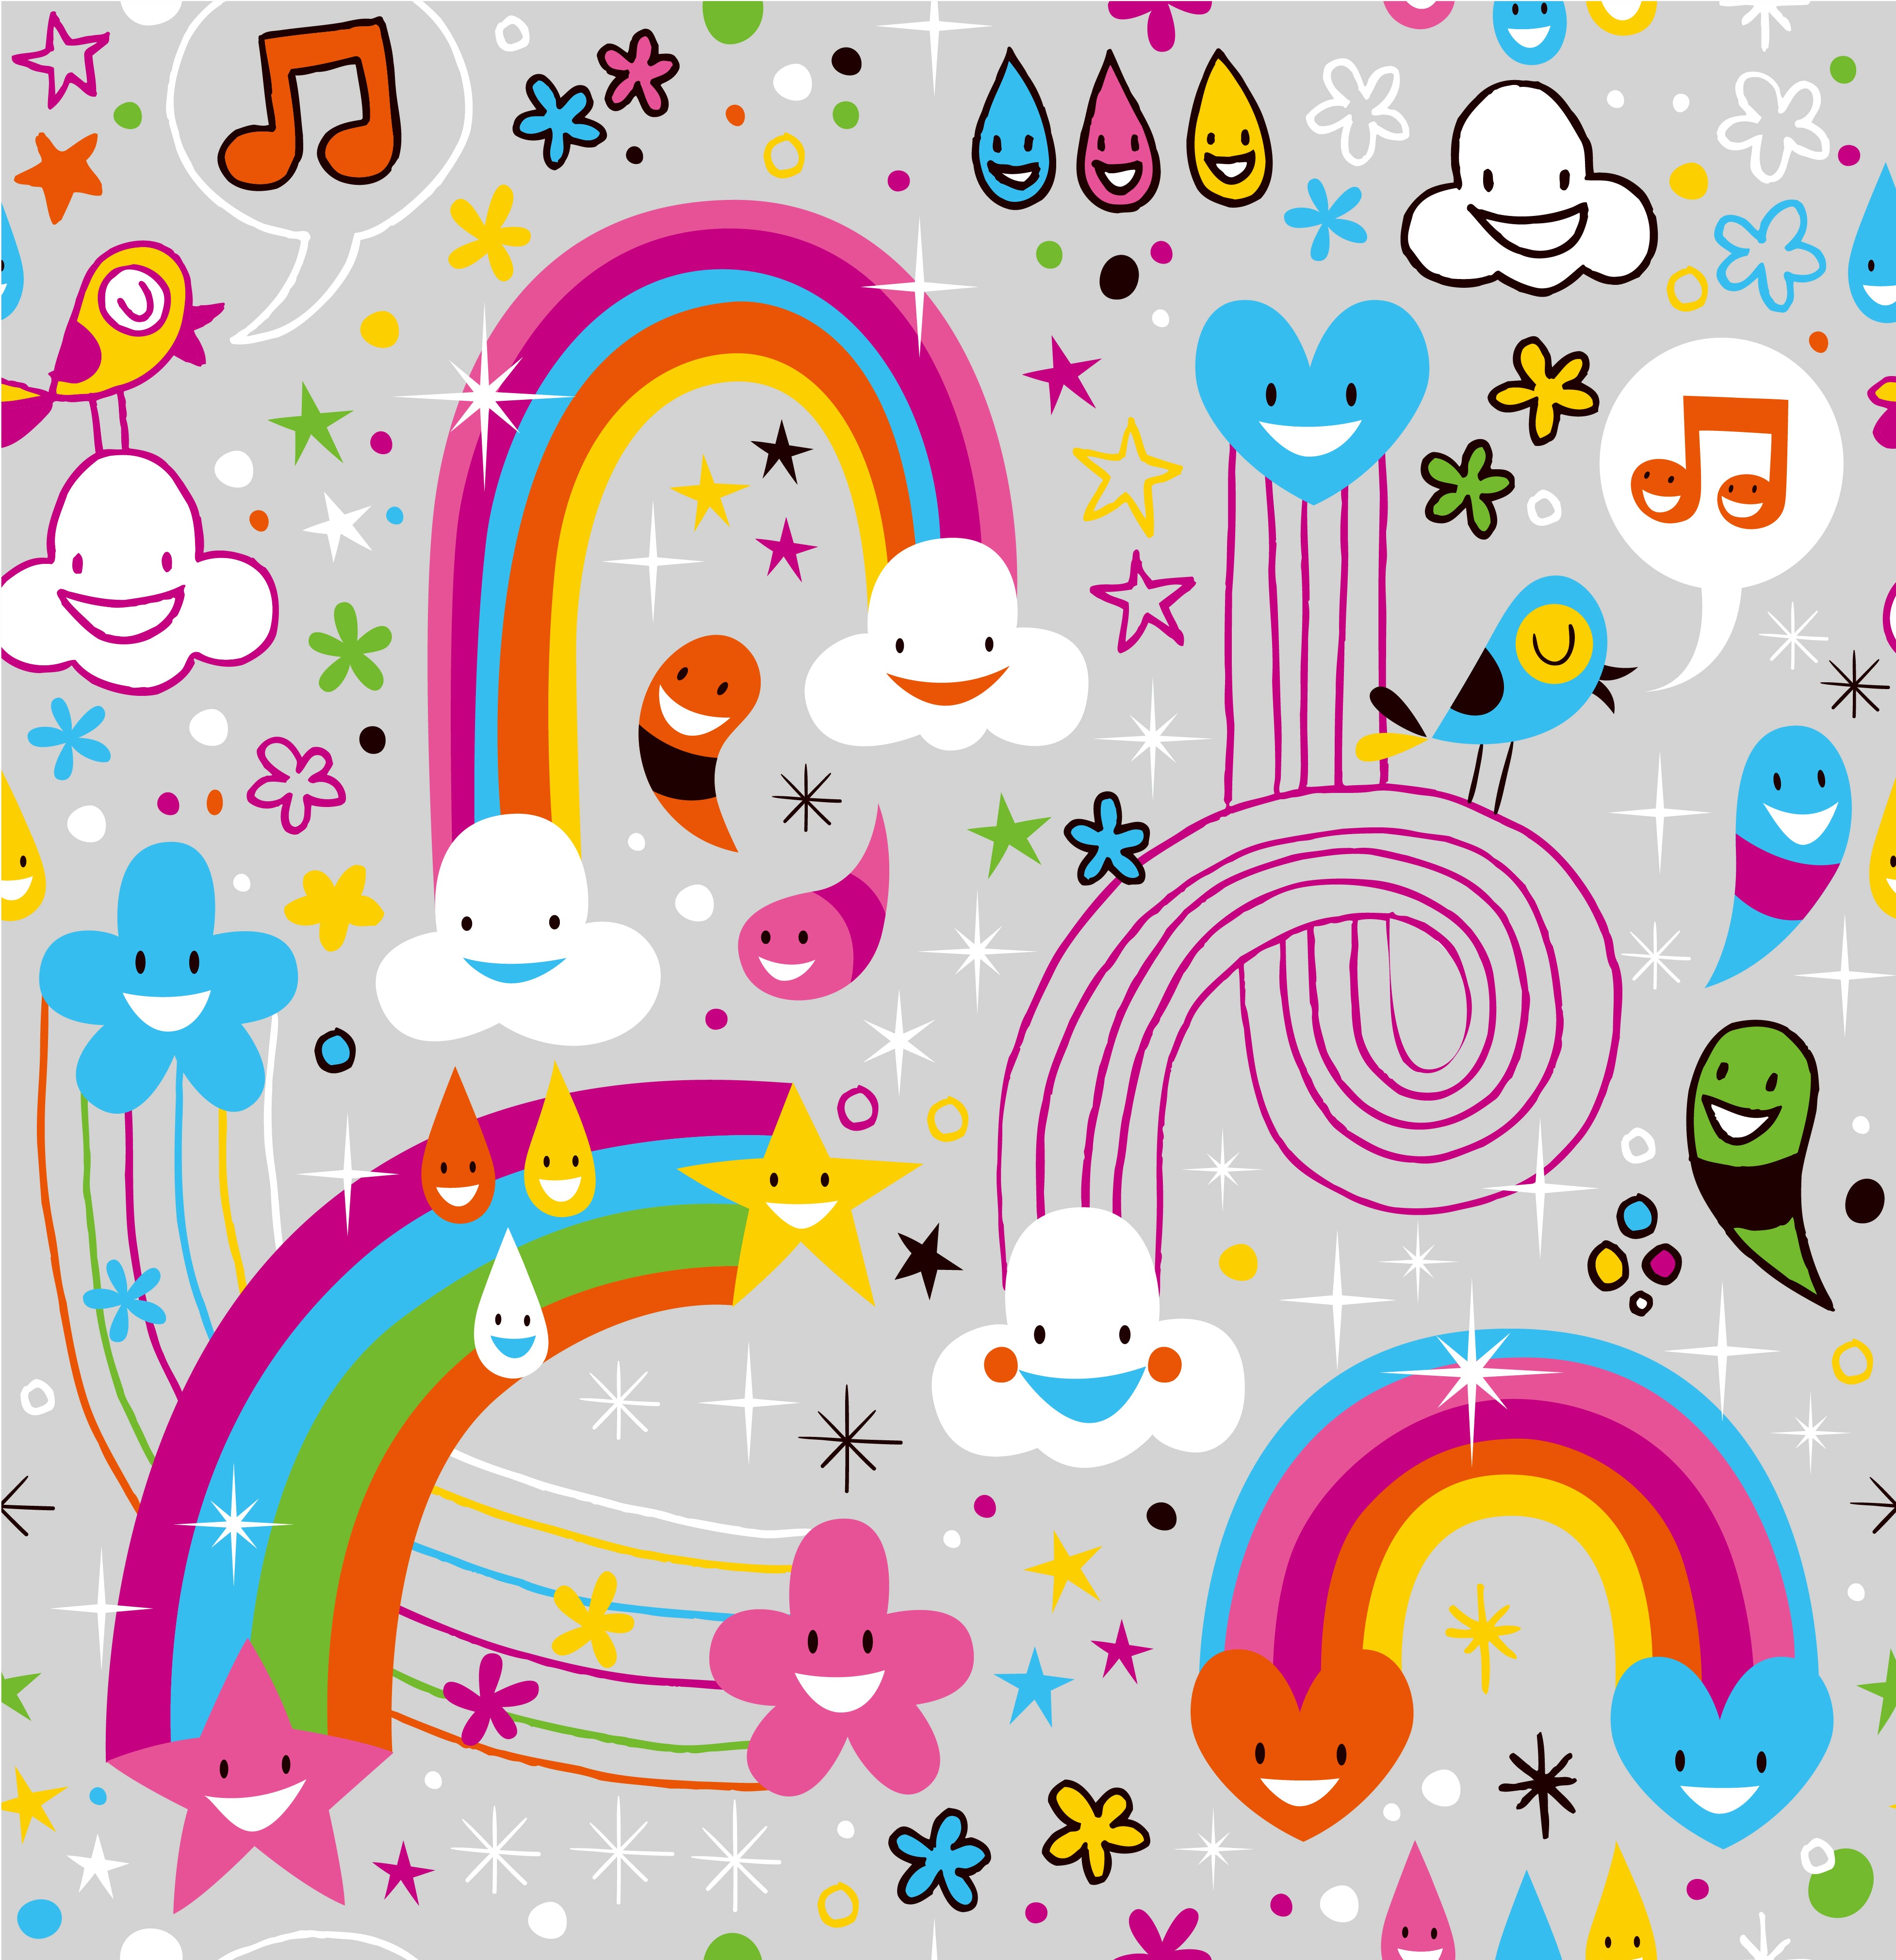 Cartoon Patterned Mural Wallpaper Non-Woven Washable Multicolored Art for Kids Bedroom